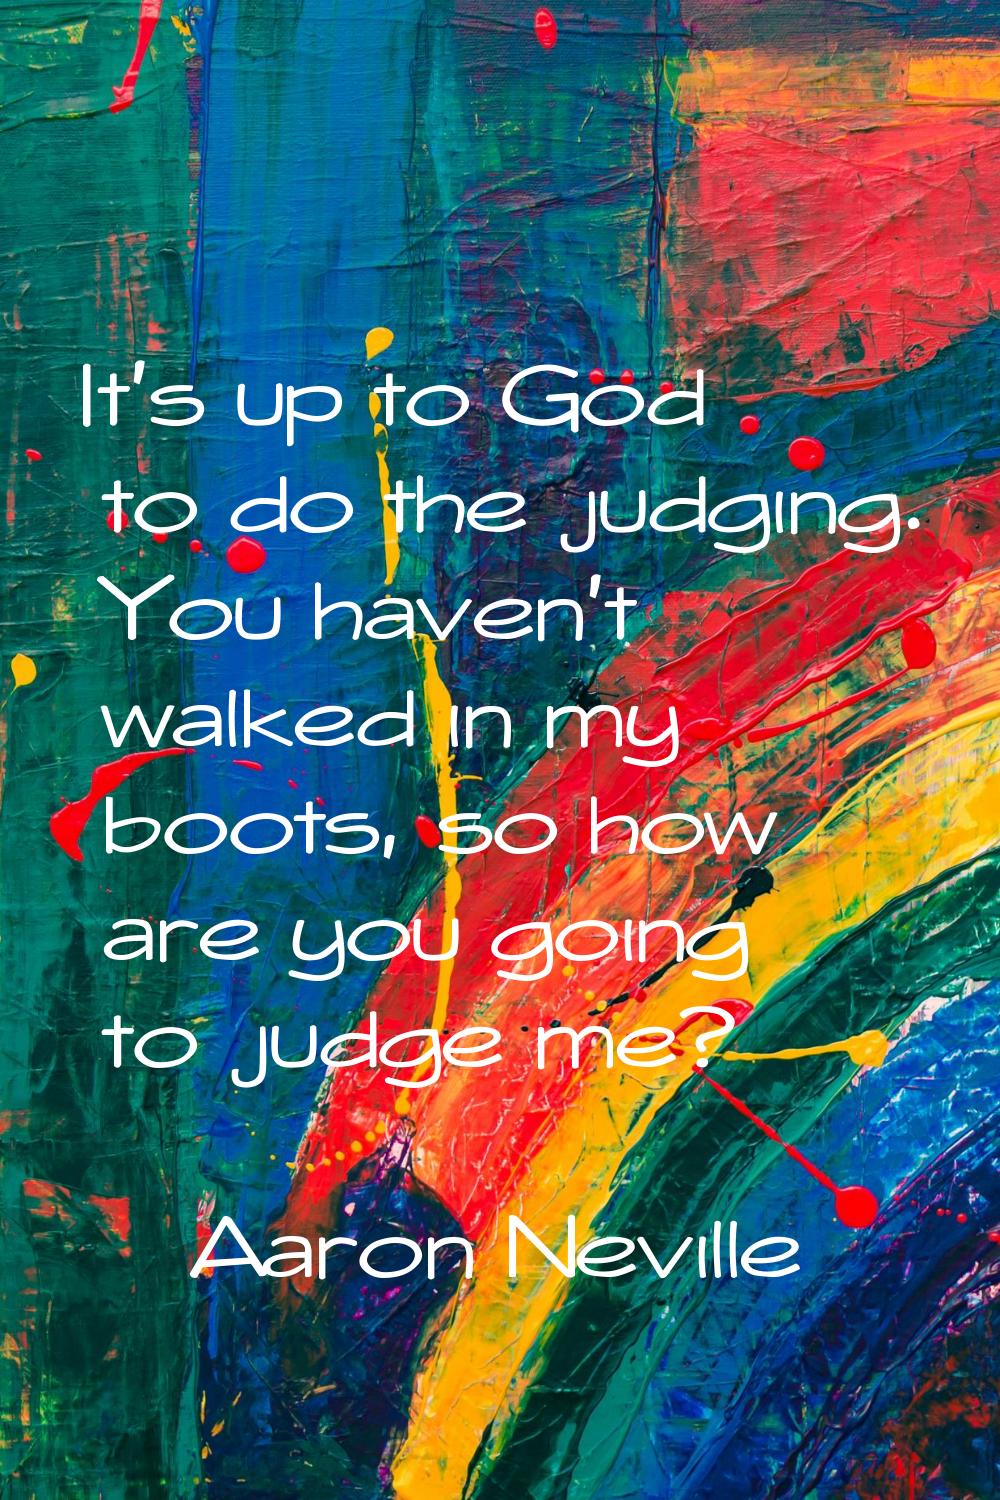 It's up to God to do the judging. You haven't walked in my boots, so how are you going to judge me?